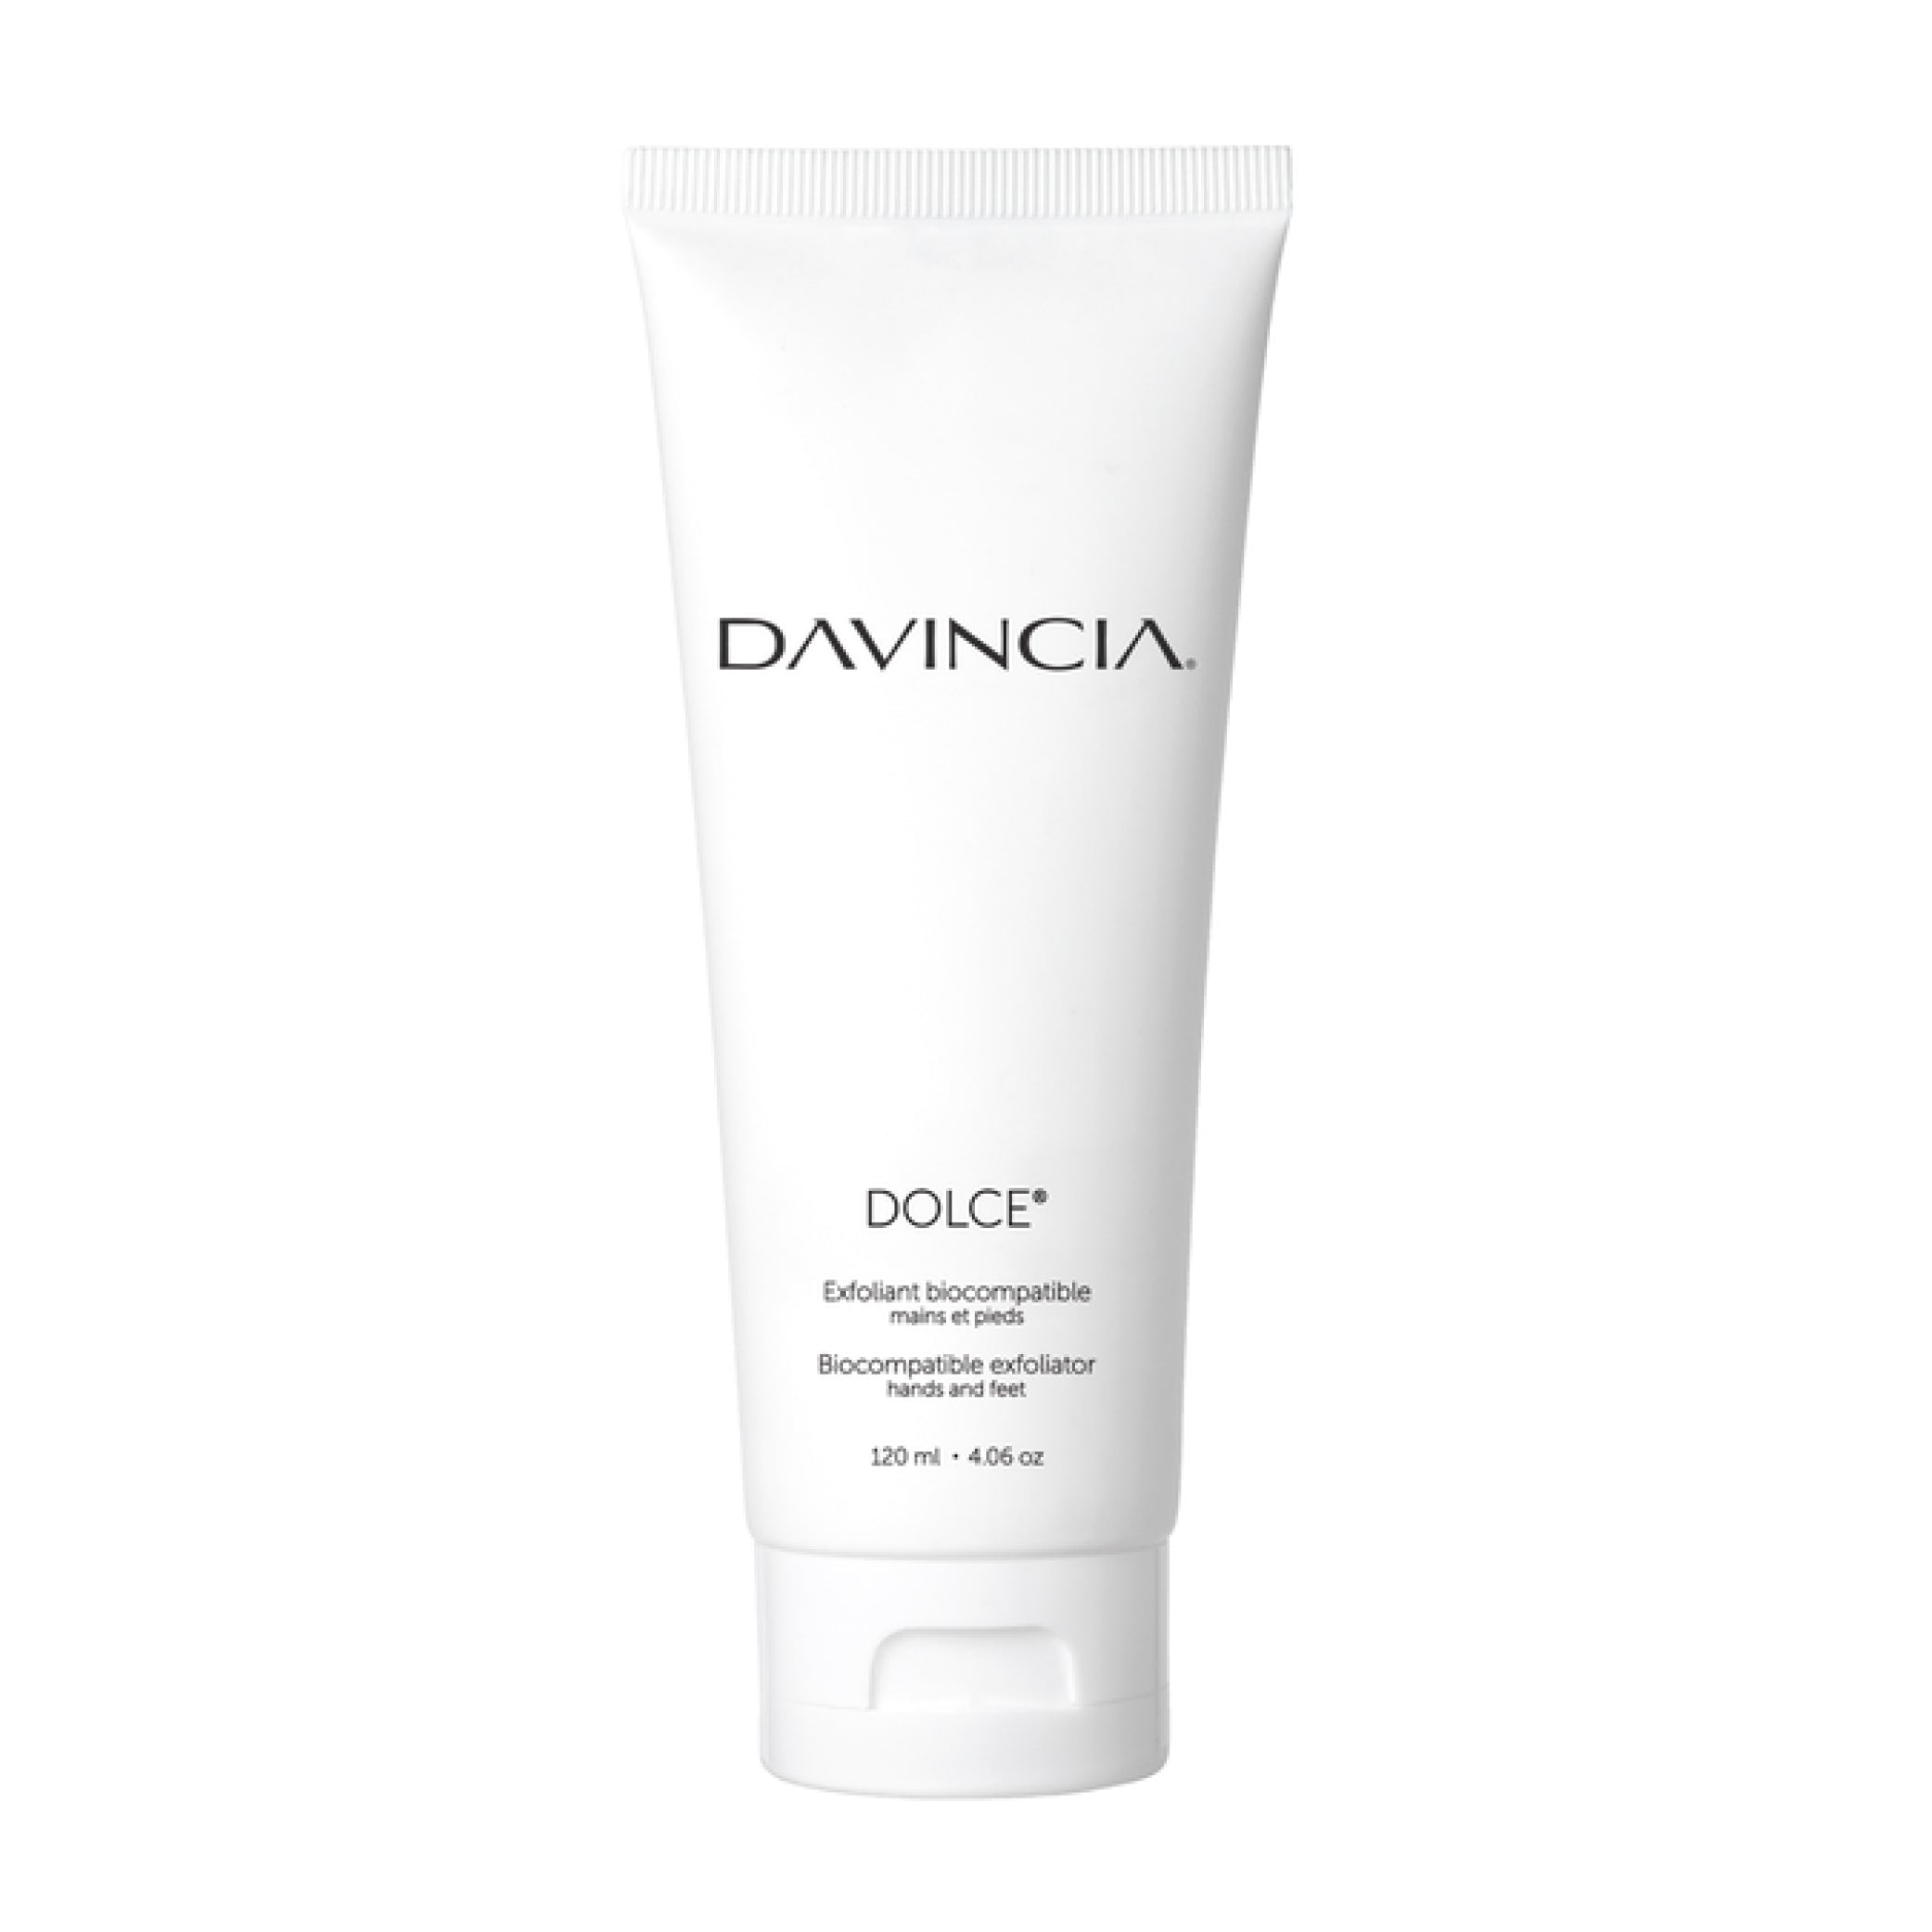 Dolce Biocompatible Exfoliator for Hands and Feet